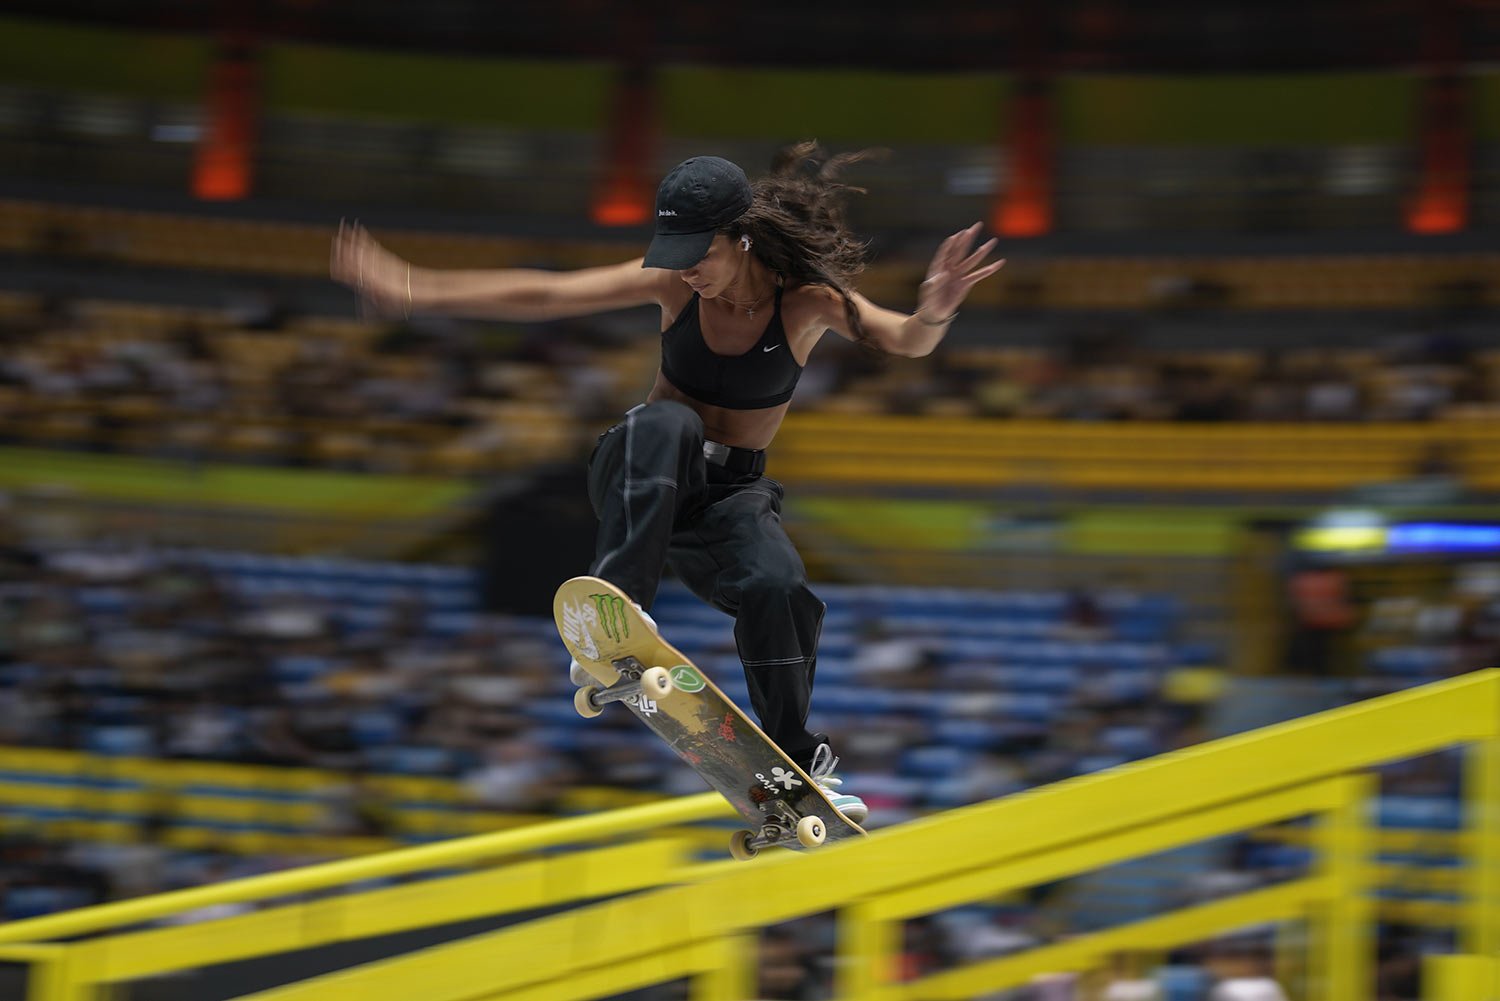  Brazil's Rayssa Leal competes in the Skate Street World Championships in Sao Paulo, Brazil, Dec. 2, 2023. (AP Photo/Andre Penner) 